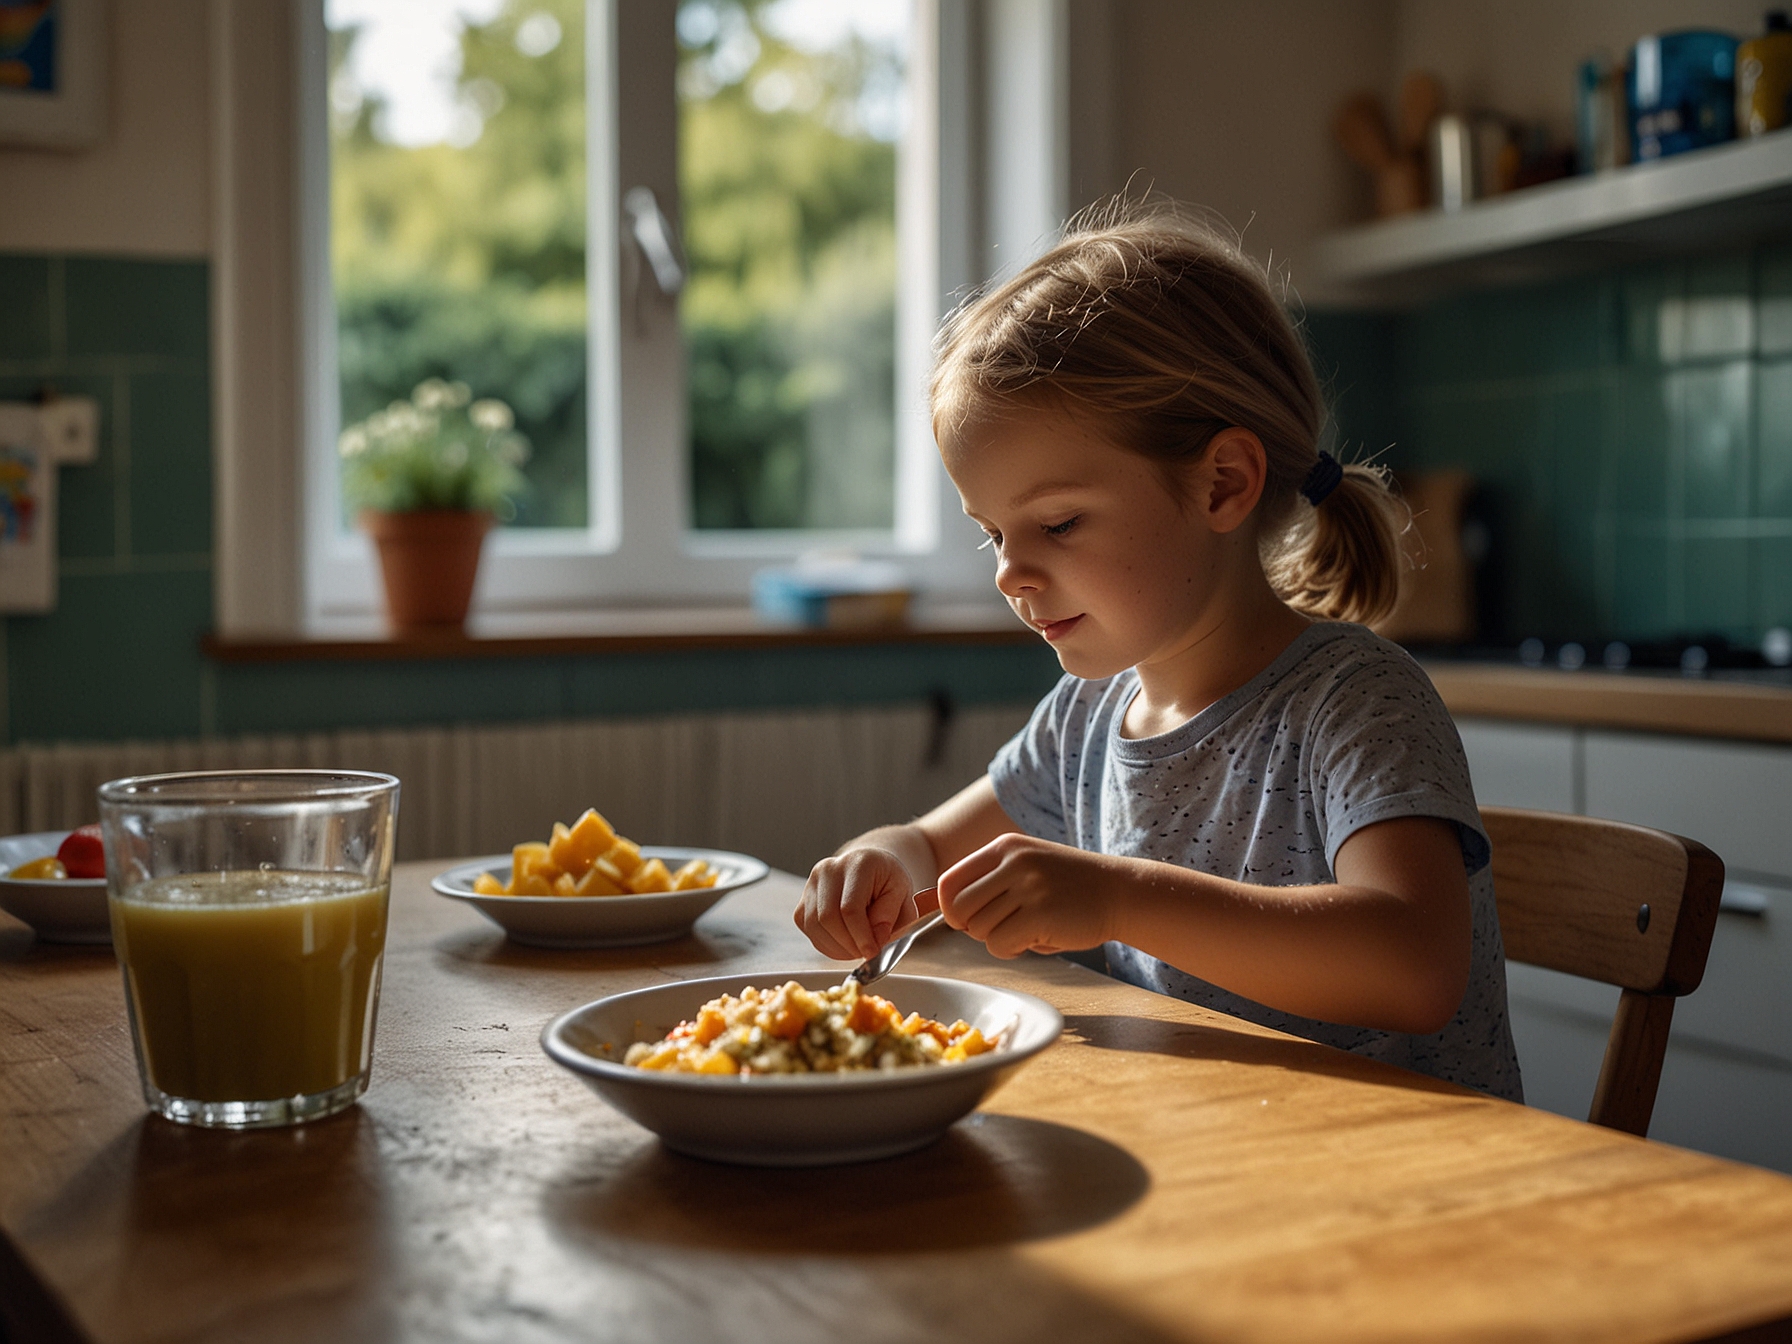 A child enjoying a healthy meal at home with the backdrop of free school meal vouchers on the kitchen counter, symbolizing the government's support in addressing child food insecurity during the summer holidays.